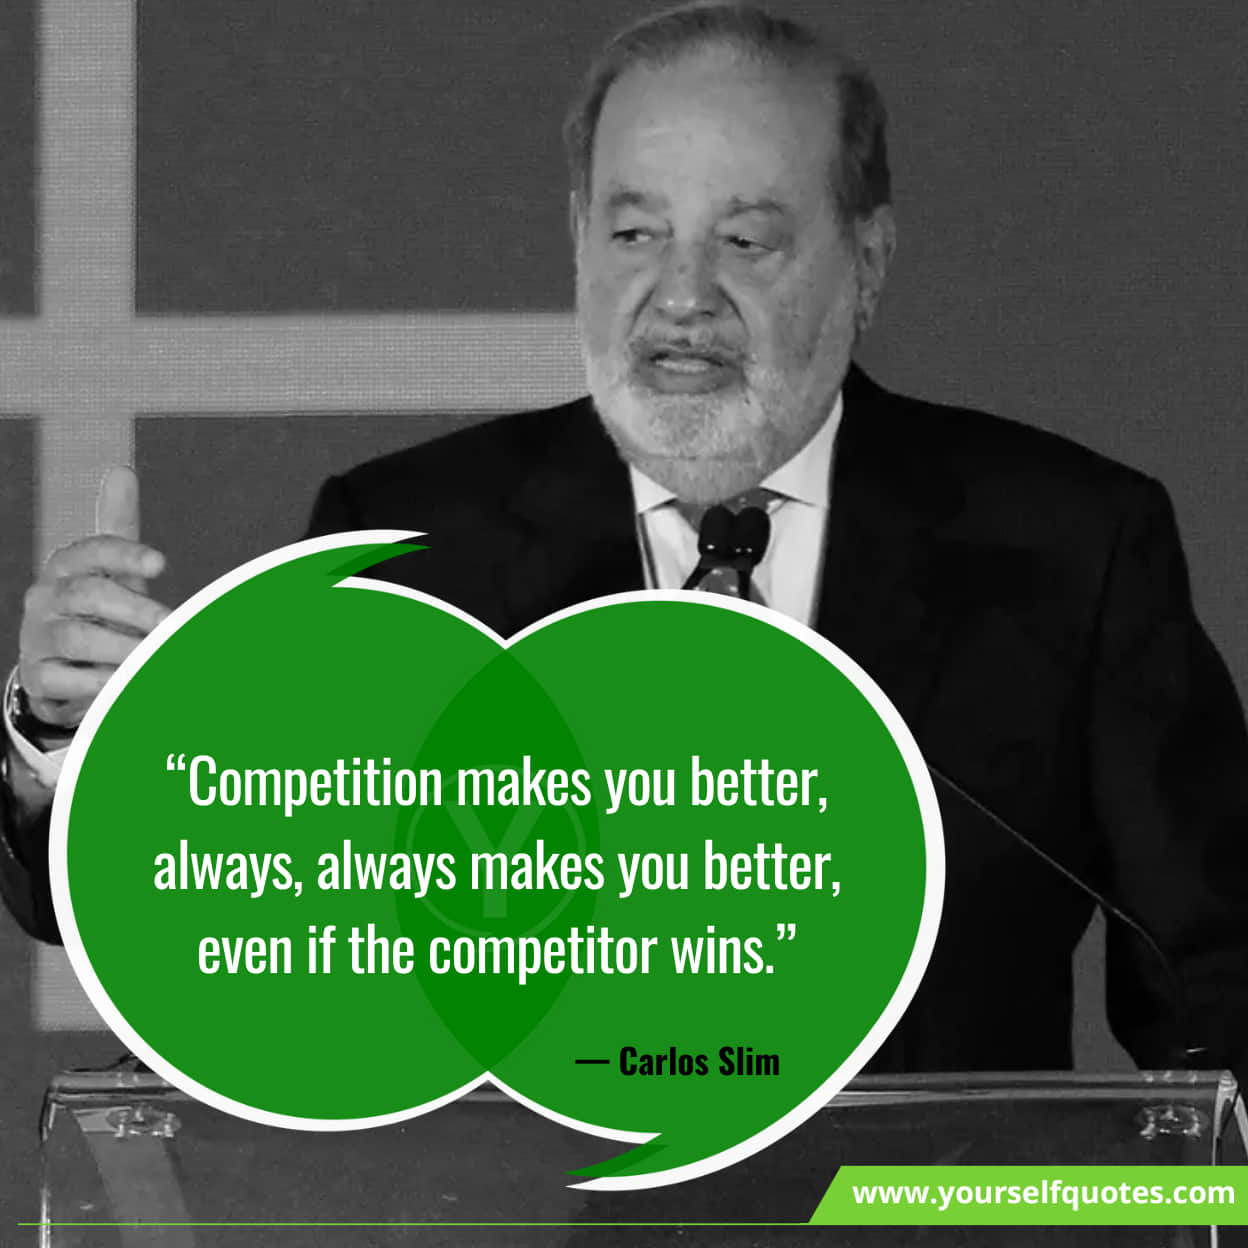 Carlos Slim Helu Quotes On Competition